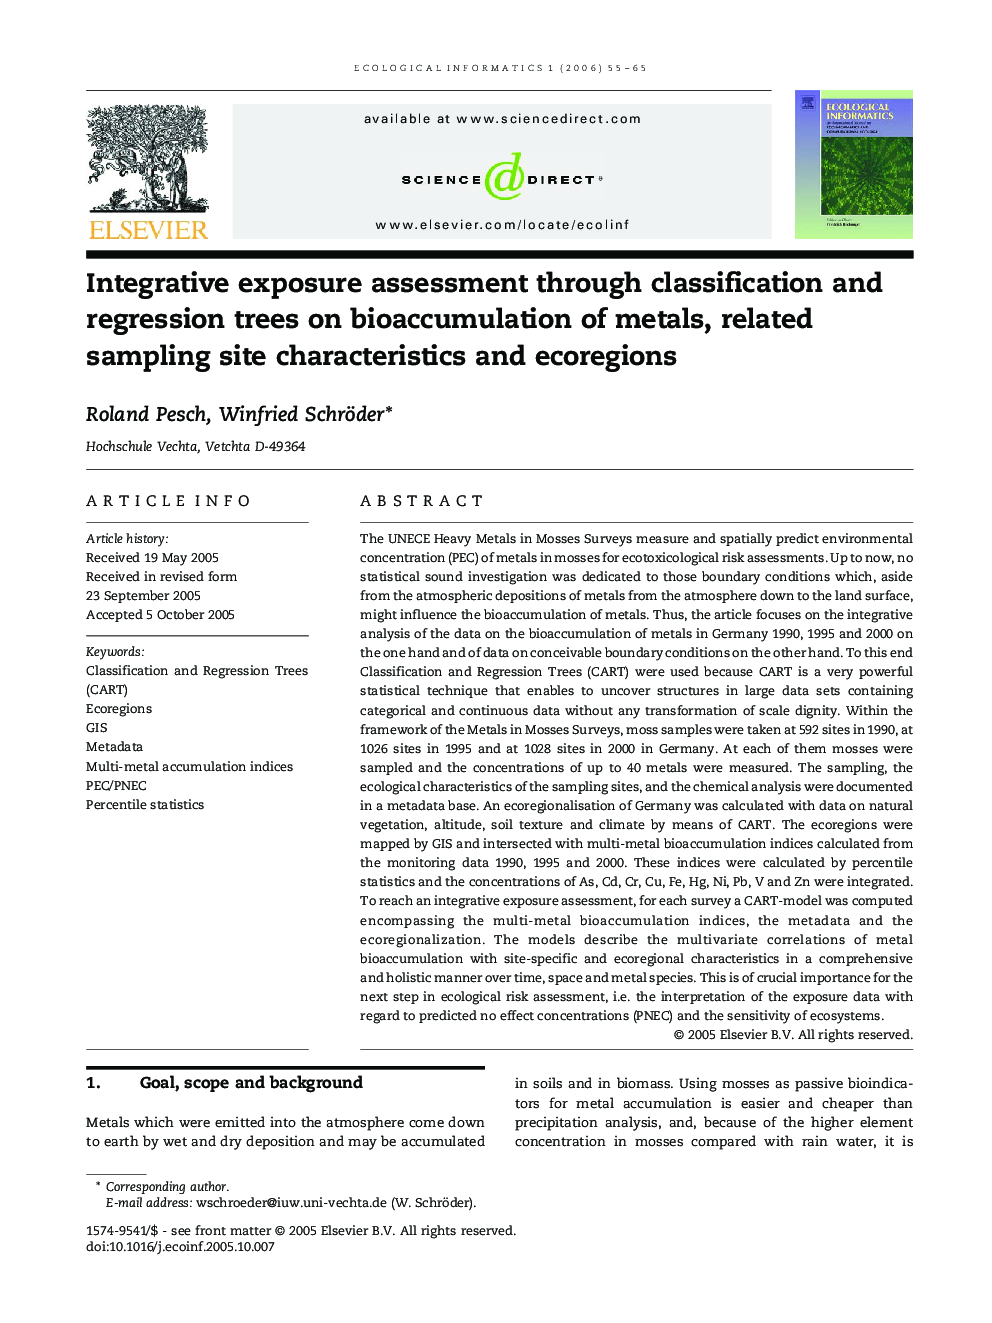 Integrative exposure assessment through classification and regression trees on bioaccumulation of metals, related sampling site characteristics and ecoregions